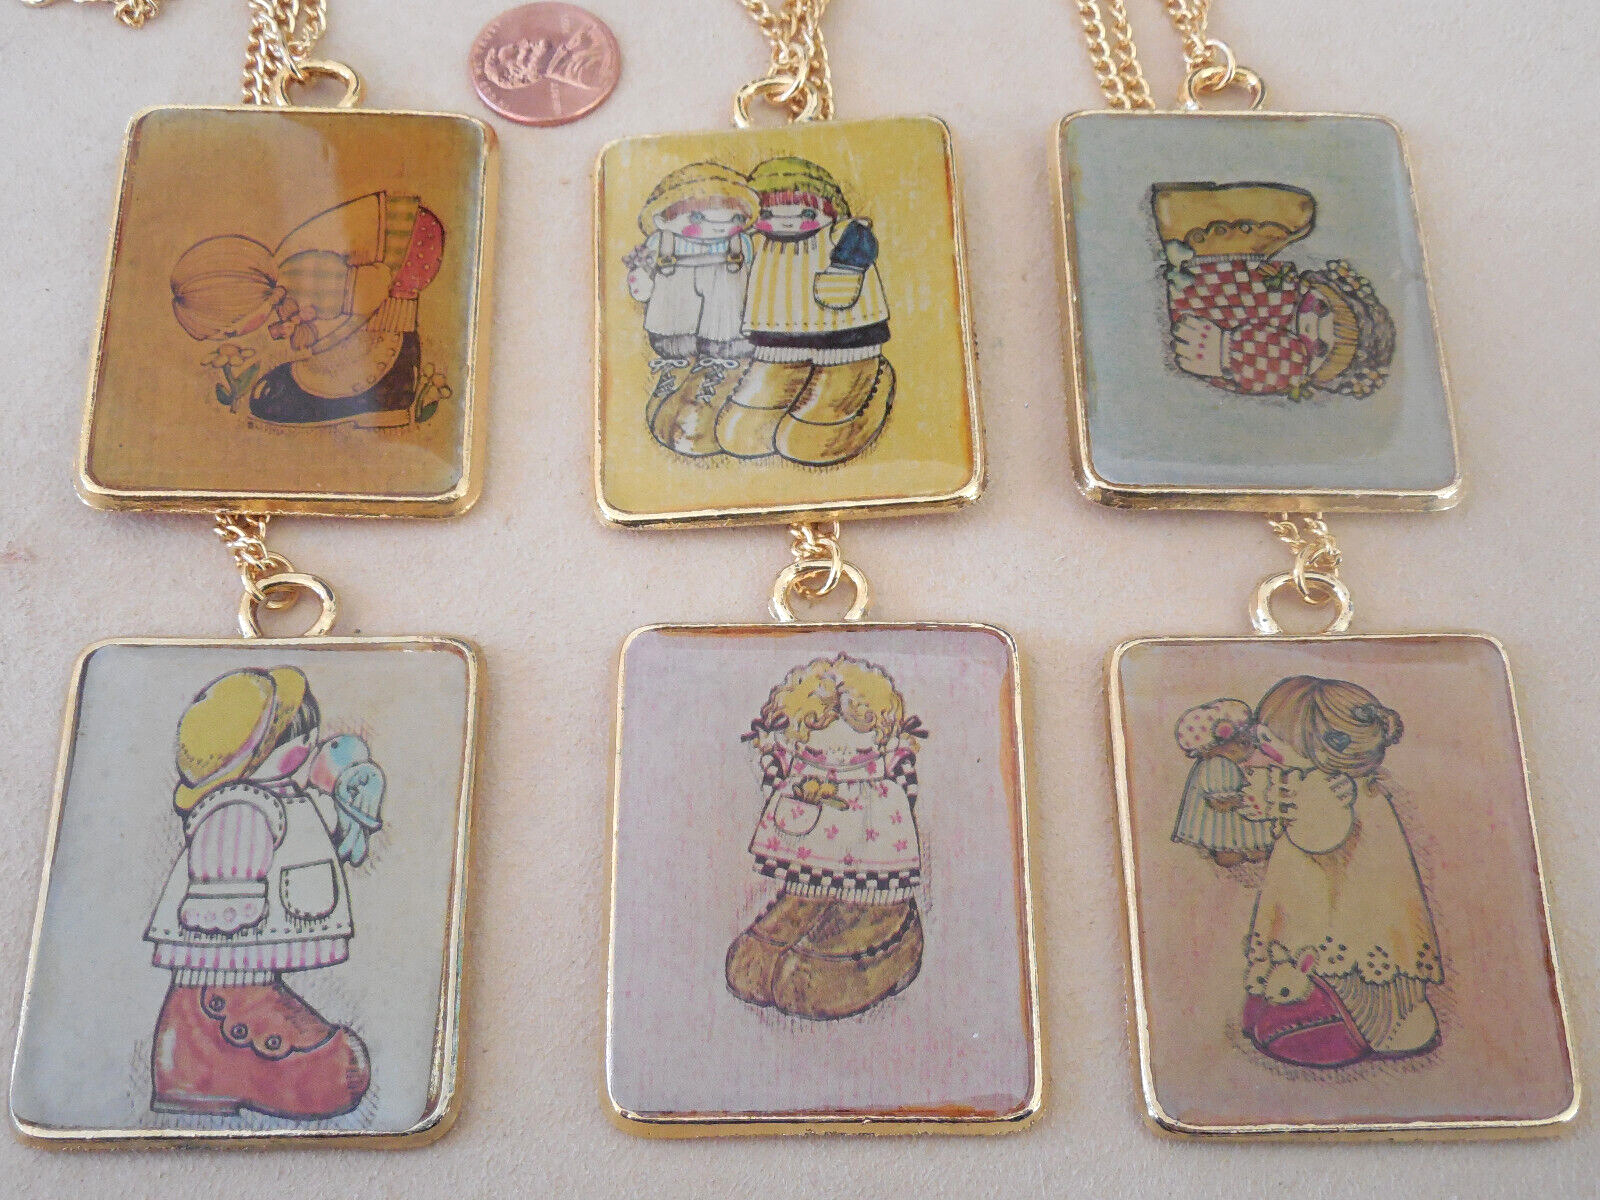 Vintage NOS lot of 6 FRAN MAR 1972 lg MOPPET pendant collectible necklaces N5 1